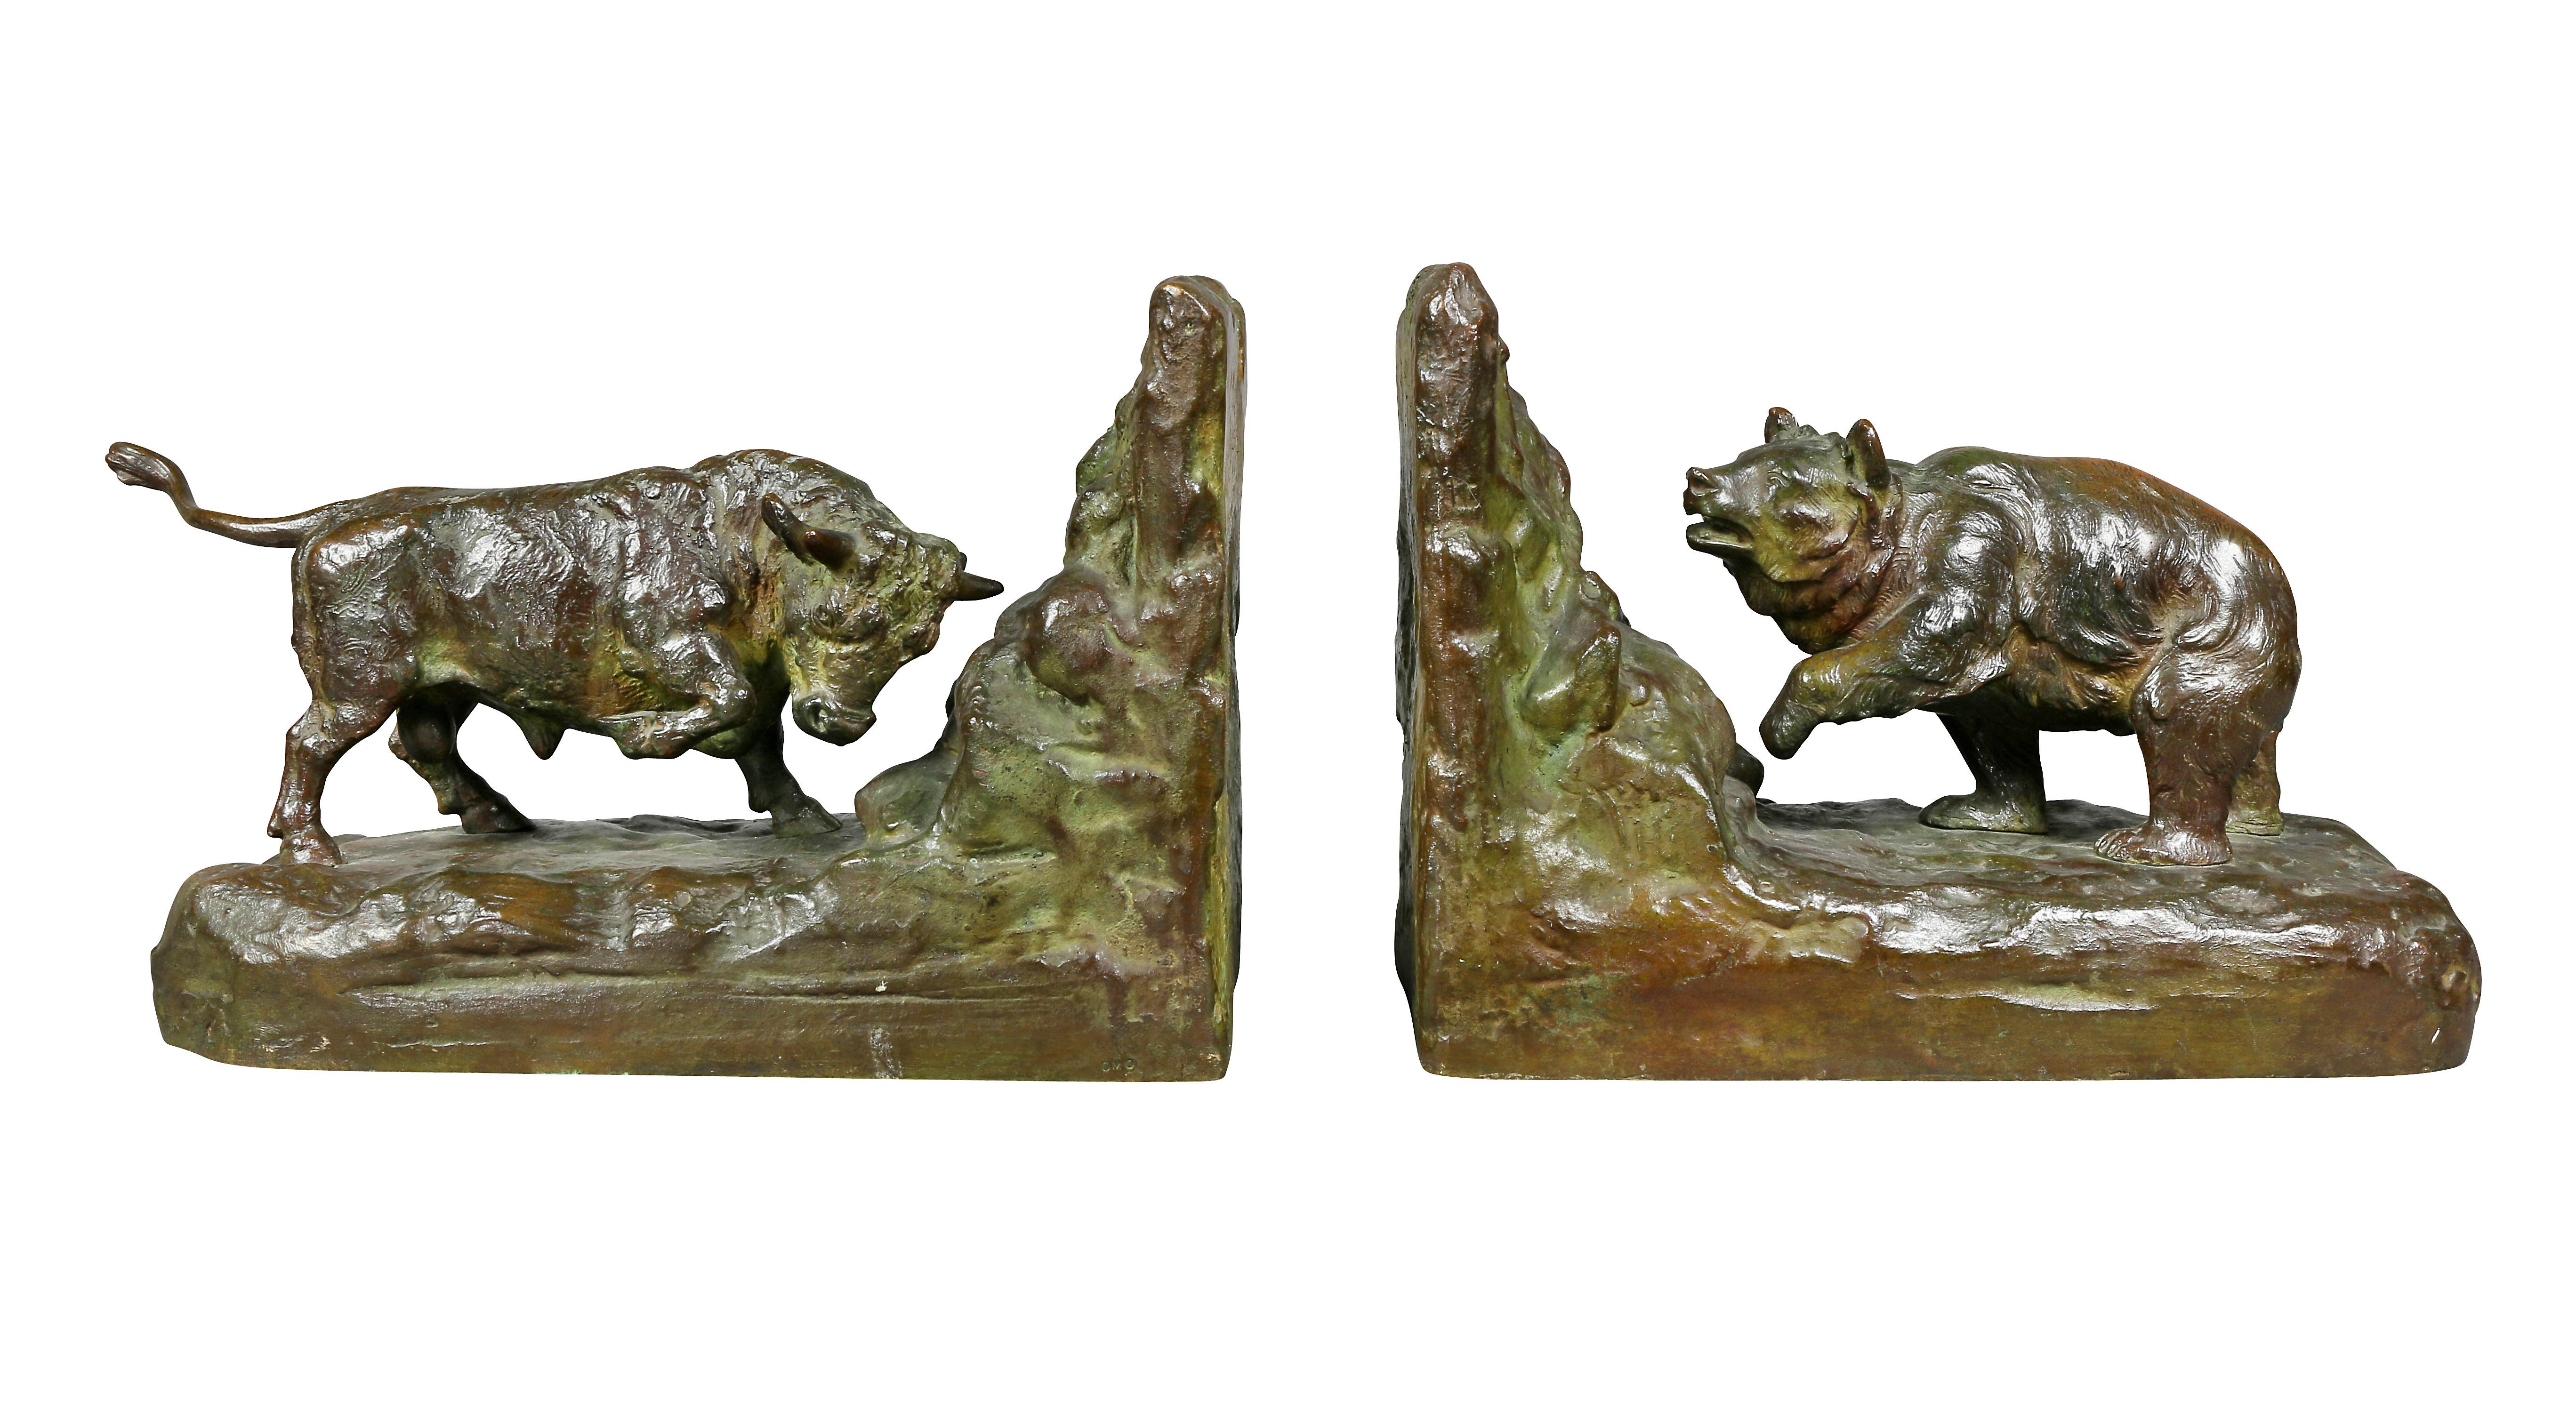 One of a bull and the other a bear. Gorham Foundry mark. These have a gorgeous patina and a retailed by one of the top luxury shops in NYC back in the day and cast by one of the very top founderies. Currently I am researching who the artist was.